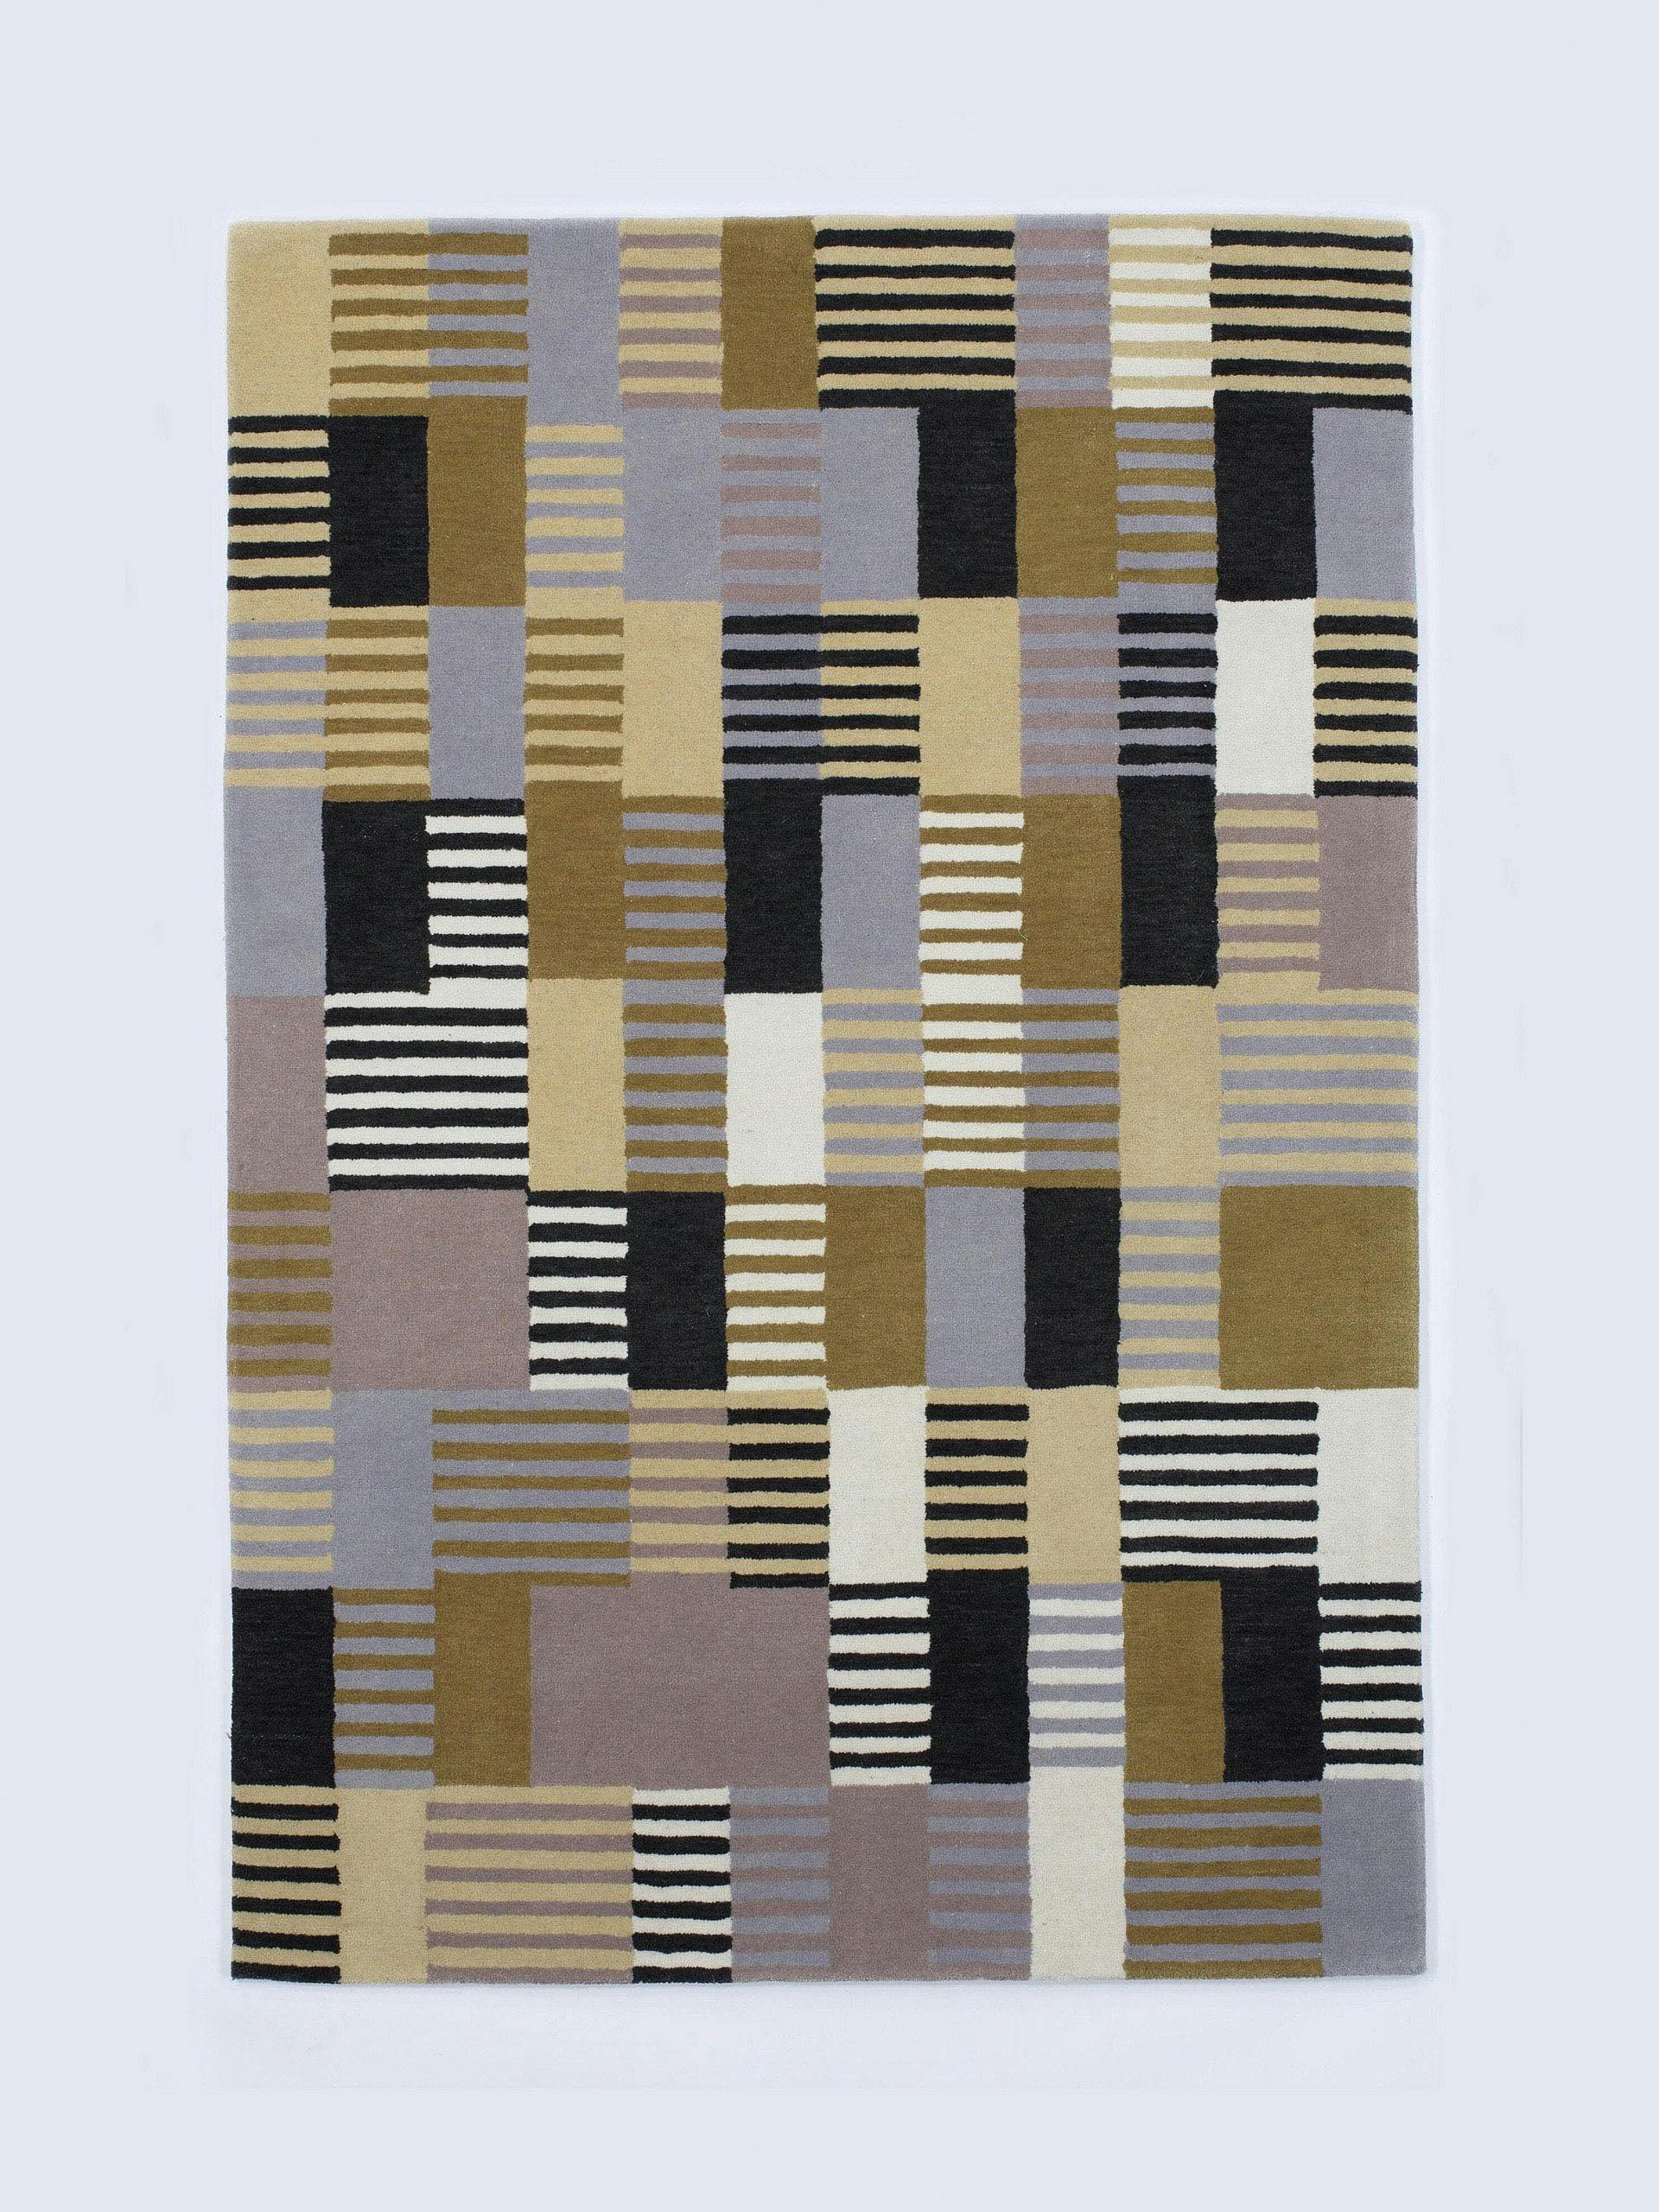 Design for Wallhanging by Anni Albers - 1.2 x 1.8m